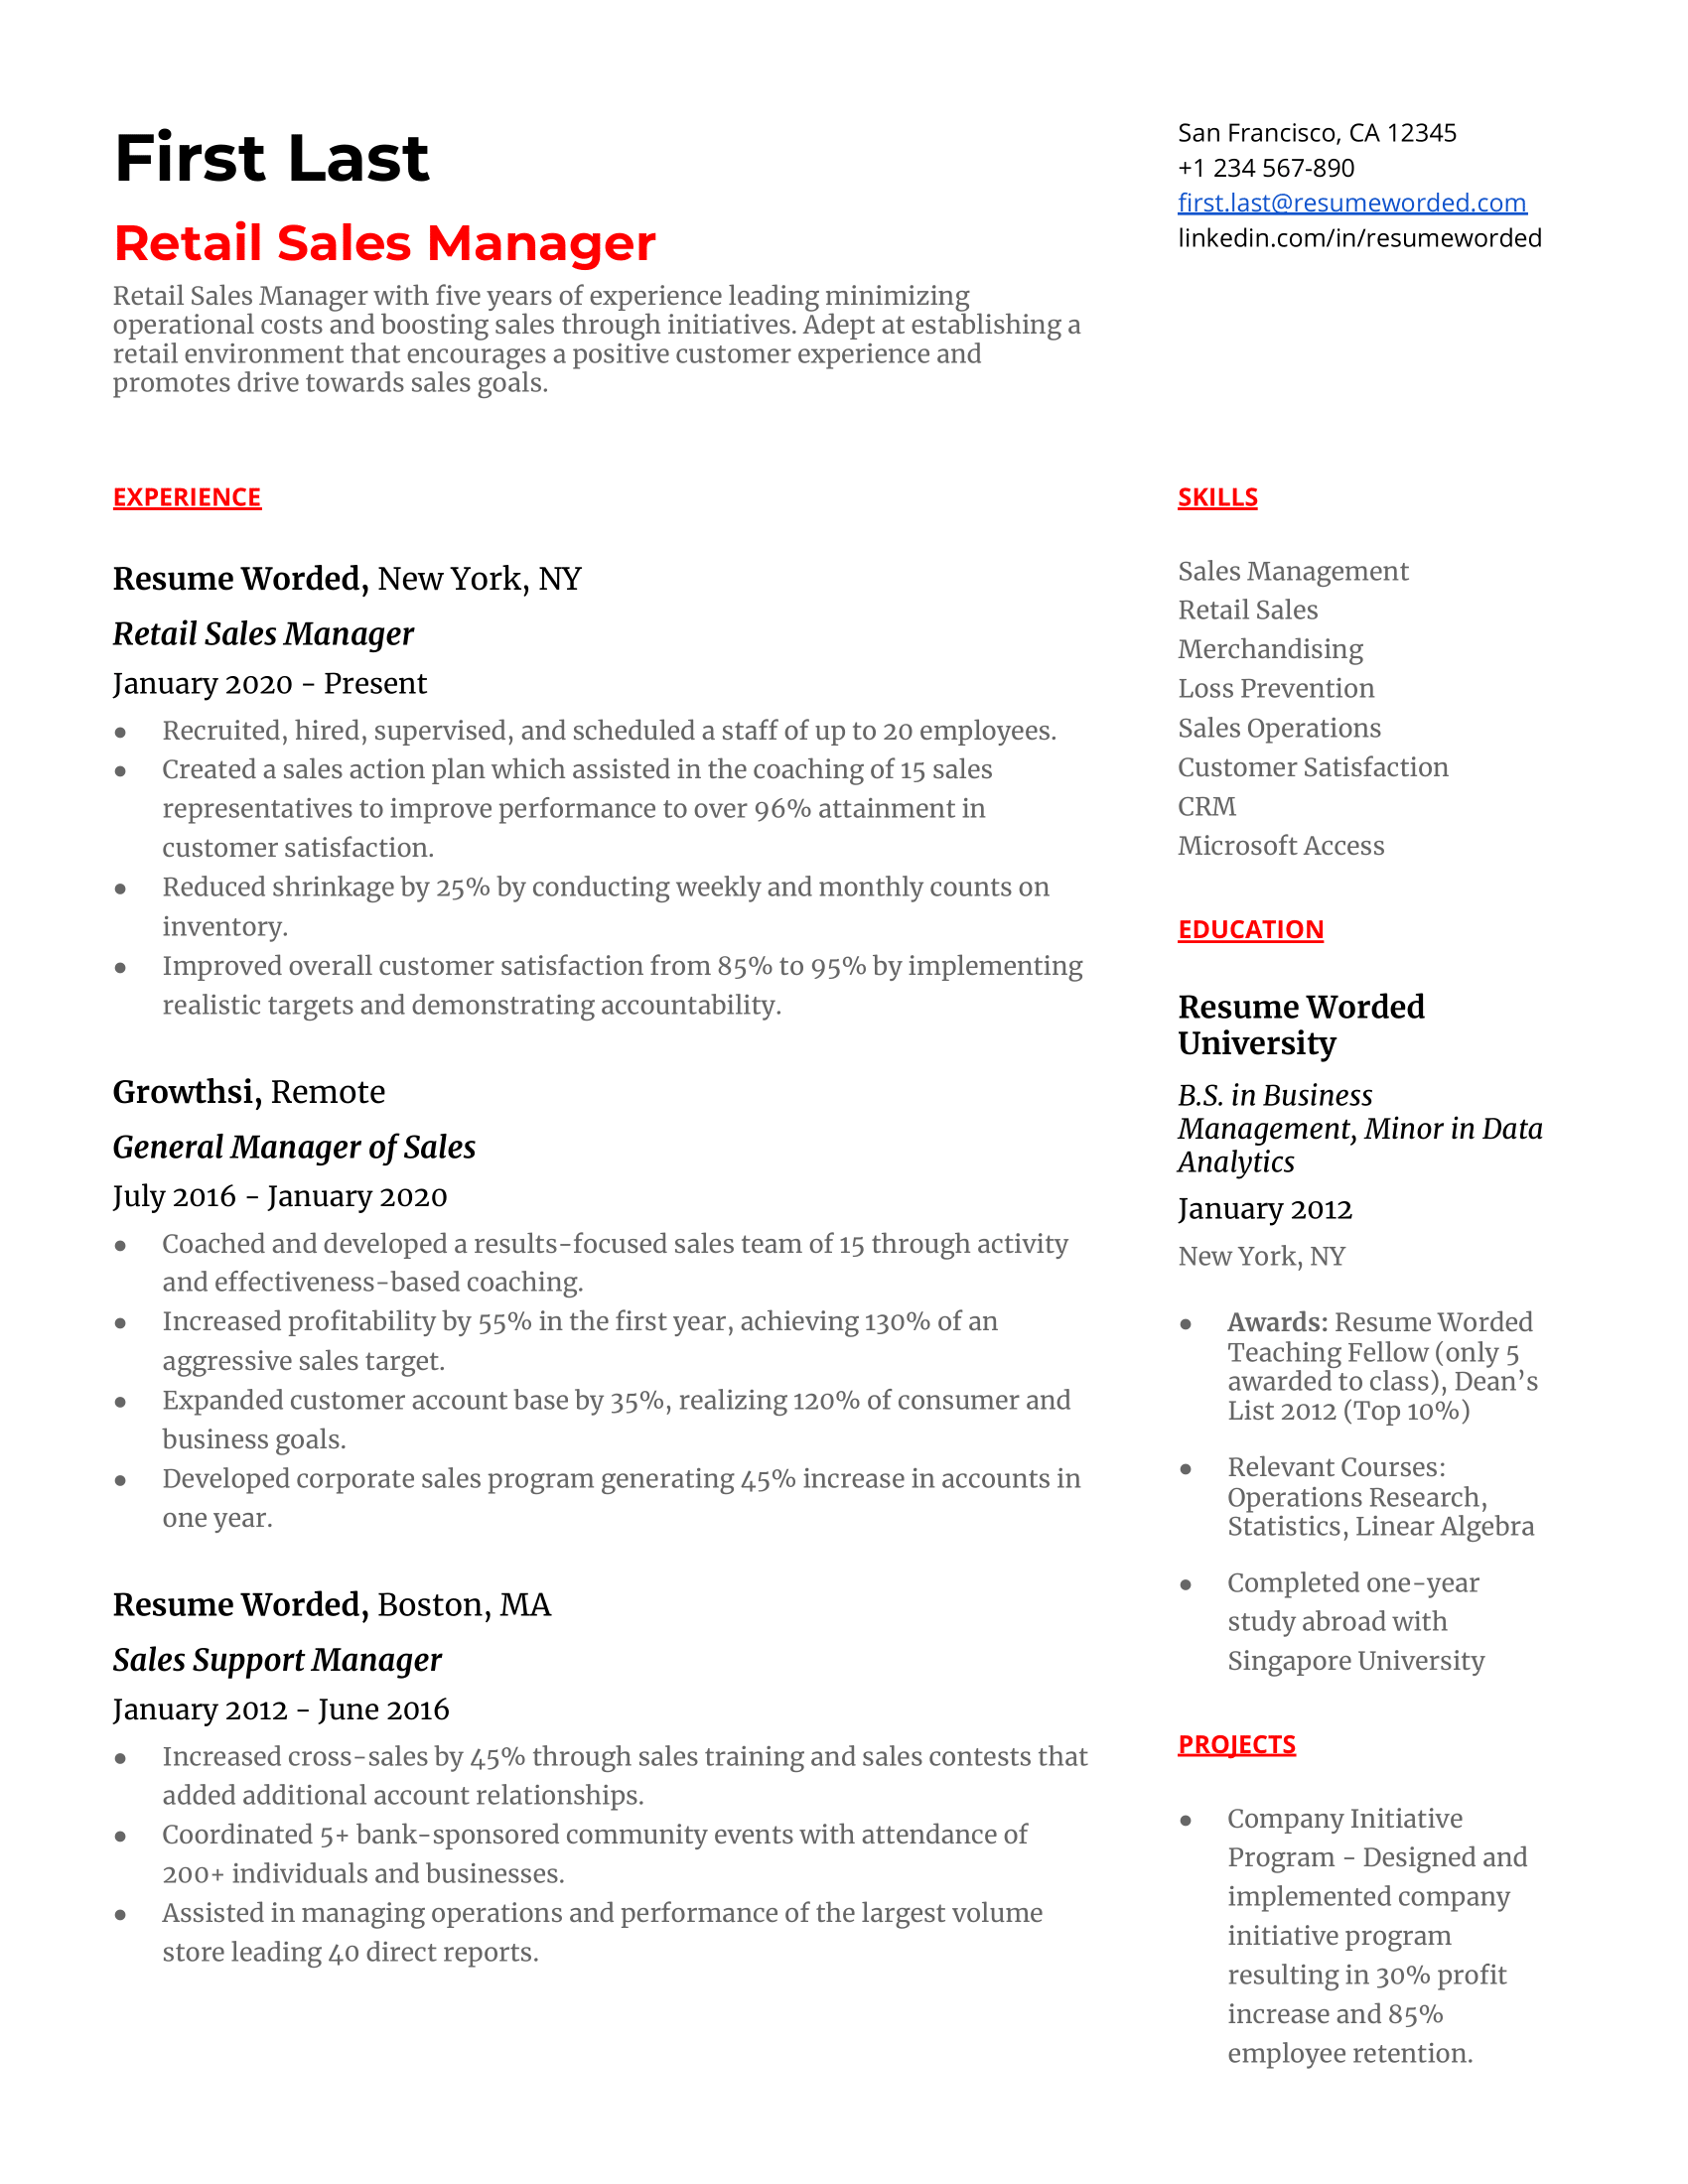 A resume for a retail sales manager with a bachelor's degree in business management and prior experience as a general manager of sales.